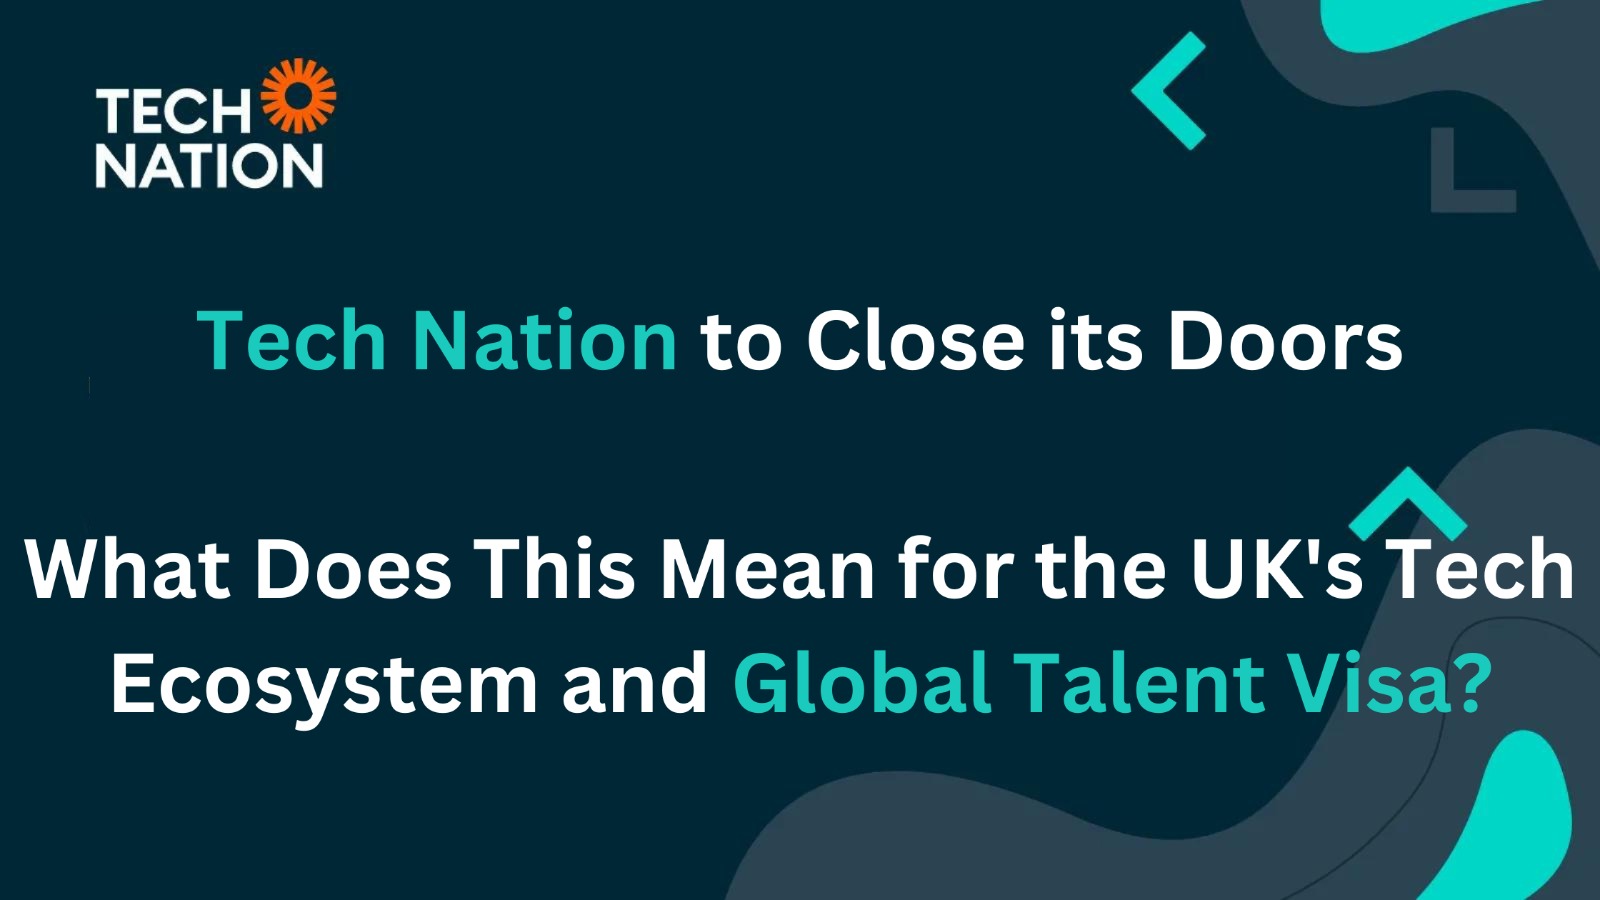 Tech Nation to Close its Doors: What Does This Mean for the UK's Tech Ecosystem and Global Talent Visa?"